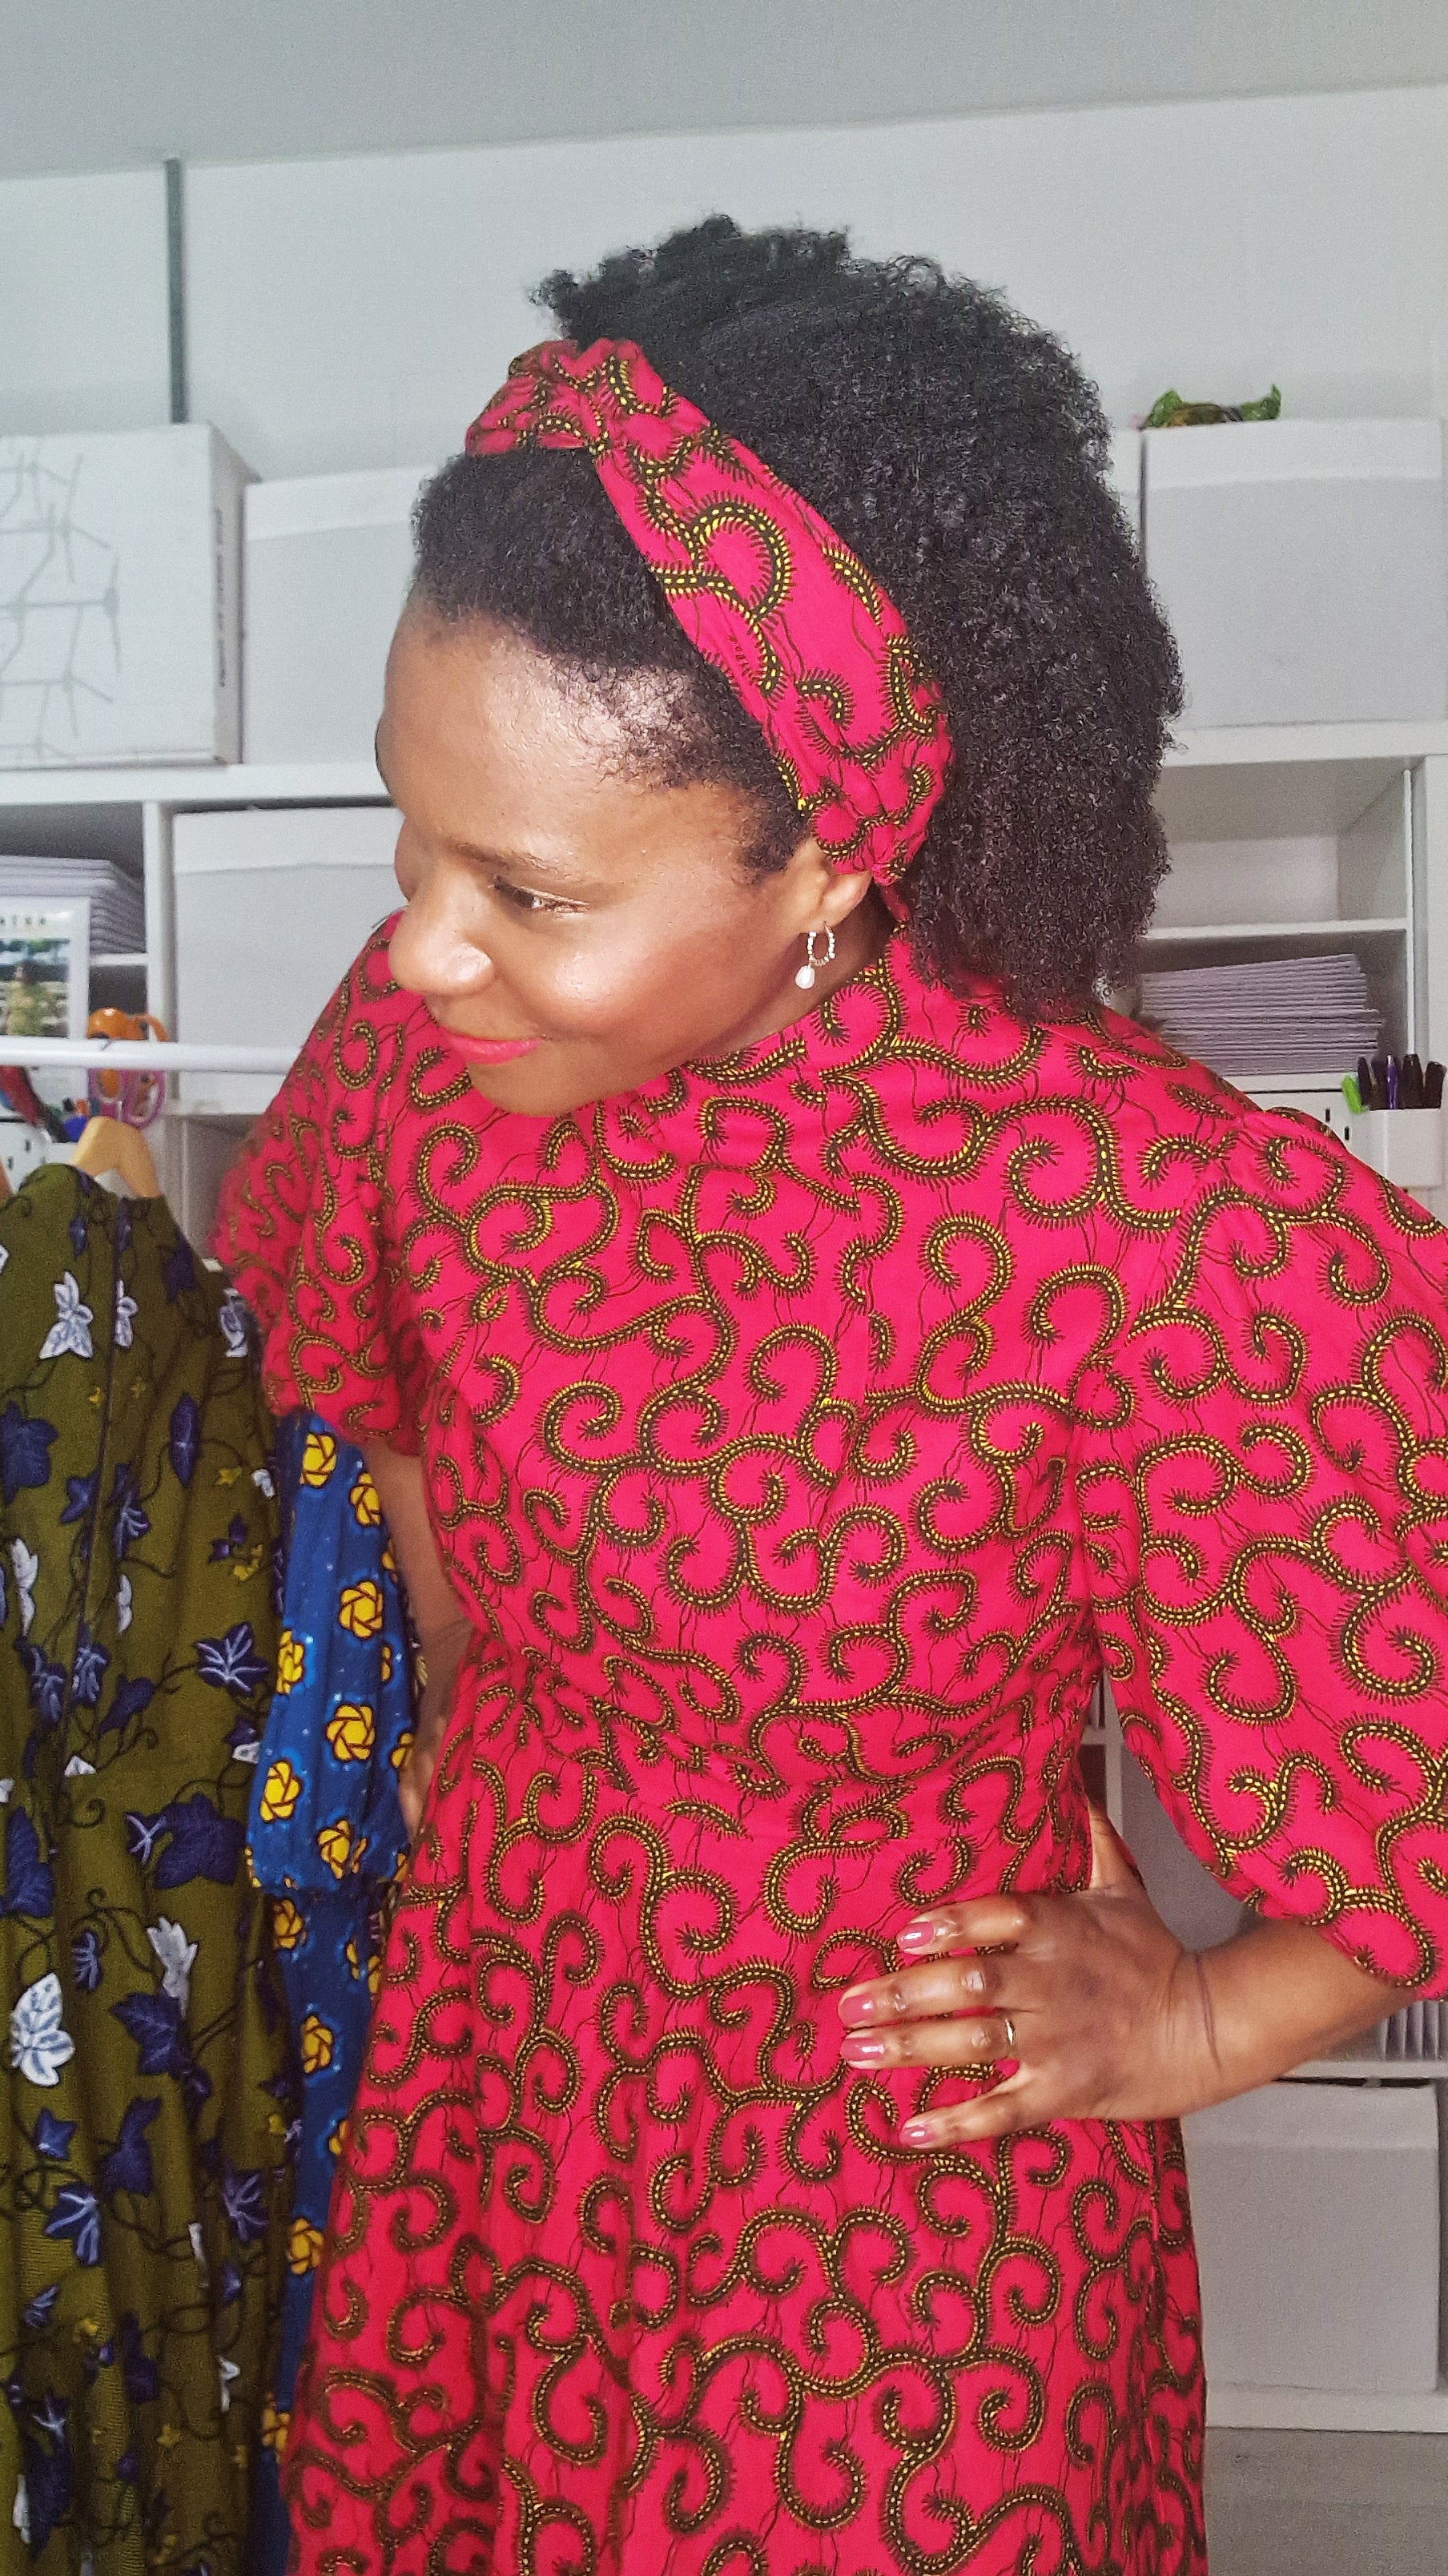 A woman showcasing the red headband with swirly elements and wearing a matching print dress.